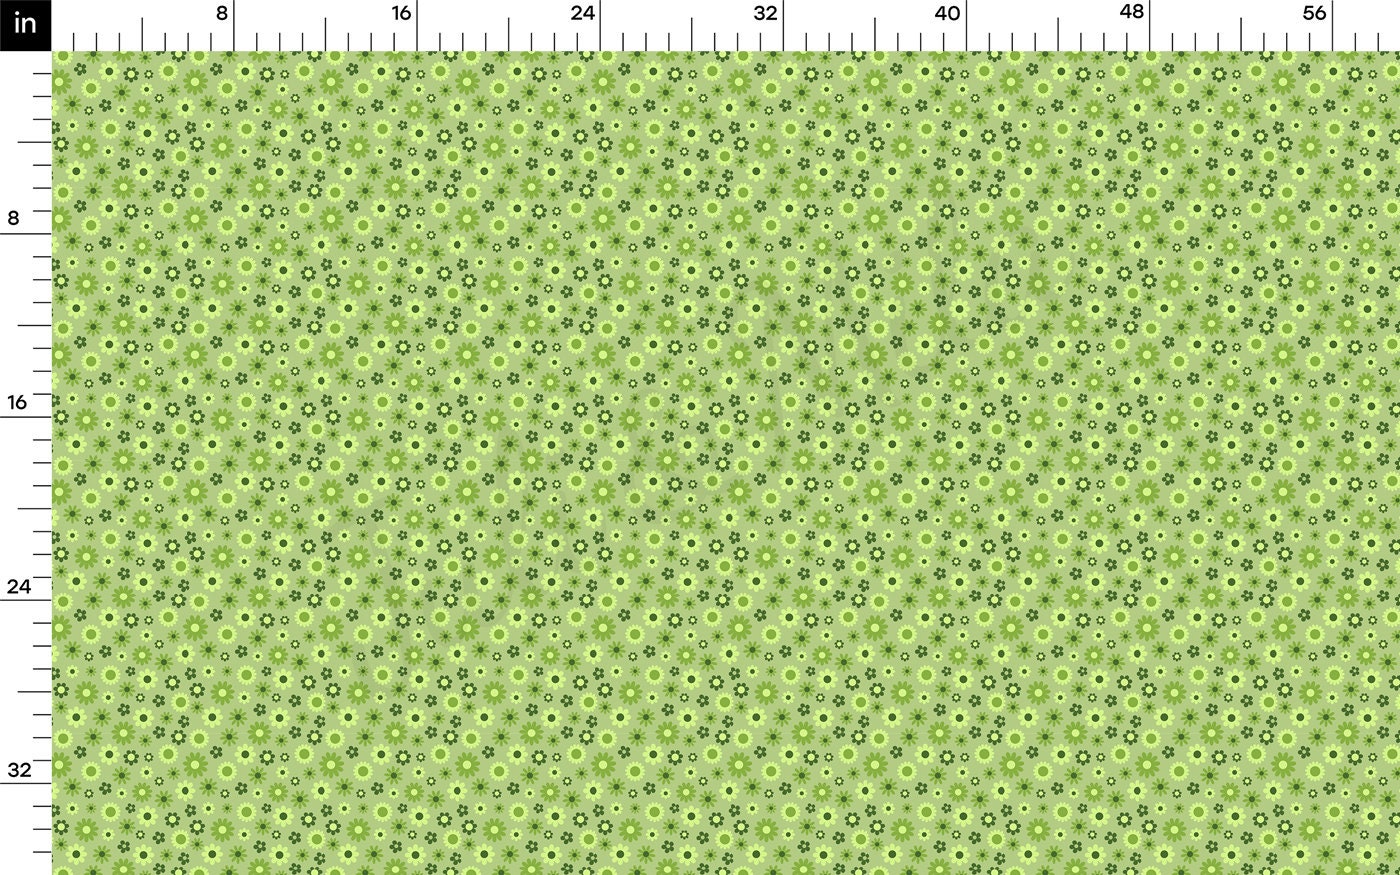 DBP Fabric Double Brushed Polyester DBP2502 St. Patrick's Day